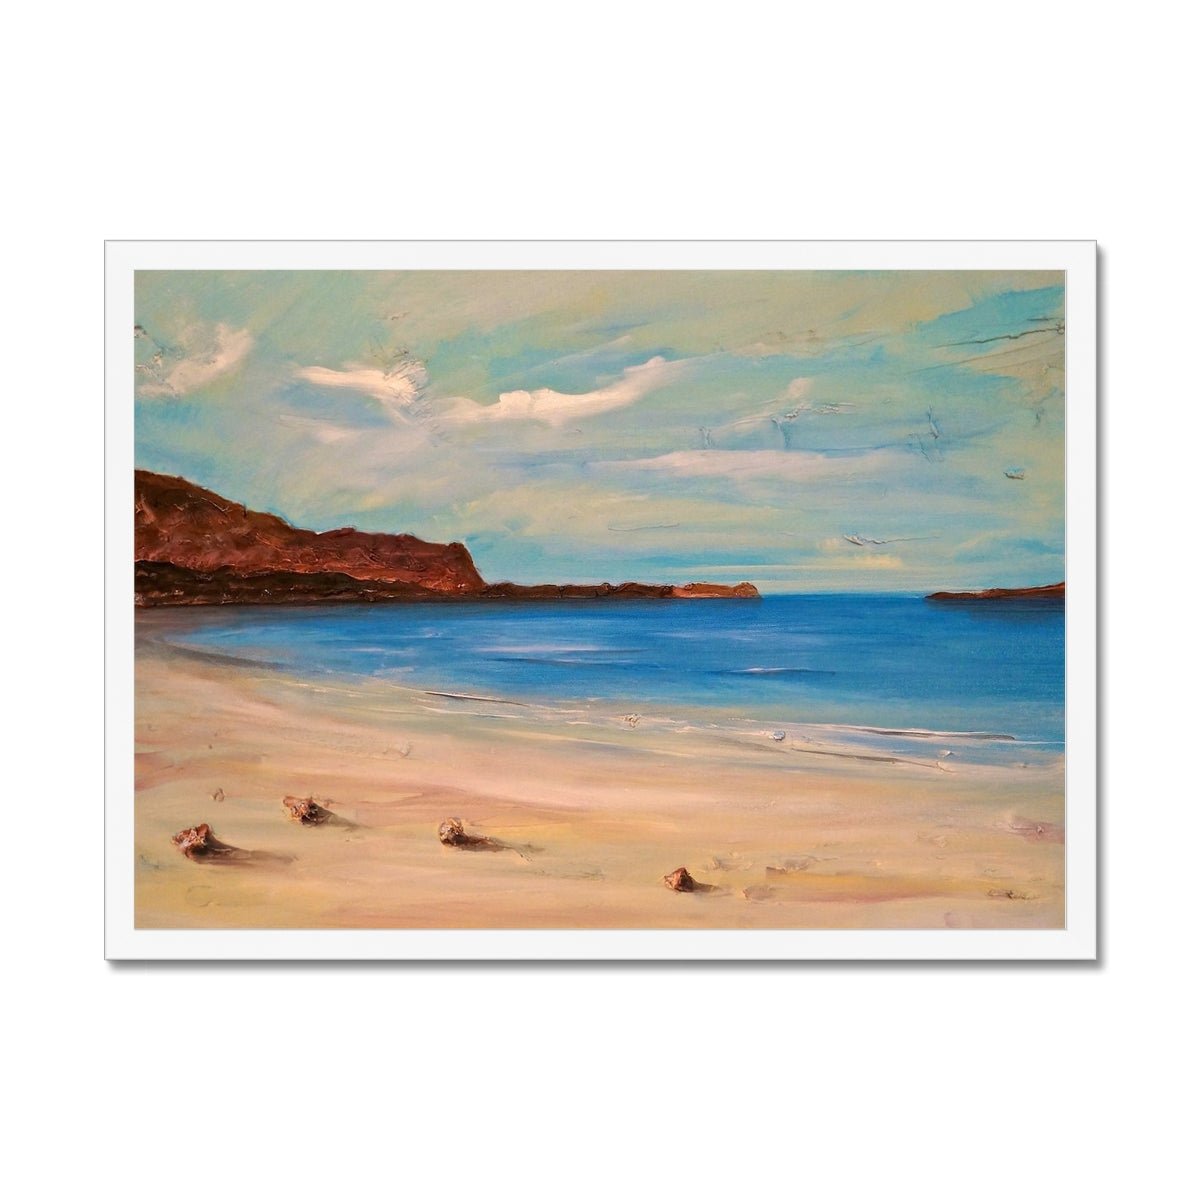 Bosta Beach Lewis Painting | Framed Prints From Scotland-Framed Prints-Hebridean Islands Art Gallery-A2 Landscape-White Frame-Paintings, Prints, Homeware, Art Gifts From Scotland By Scottish Artist Kevin Hunter